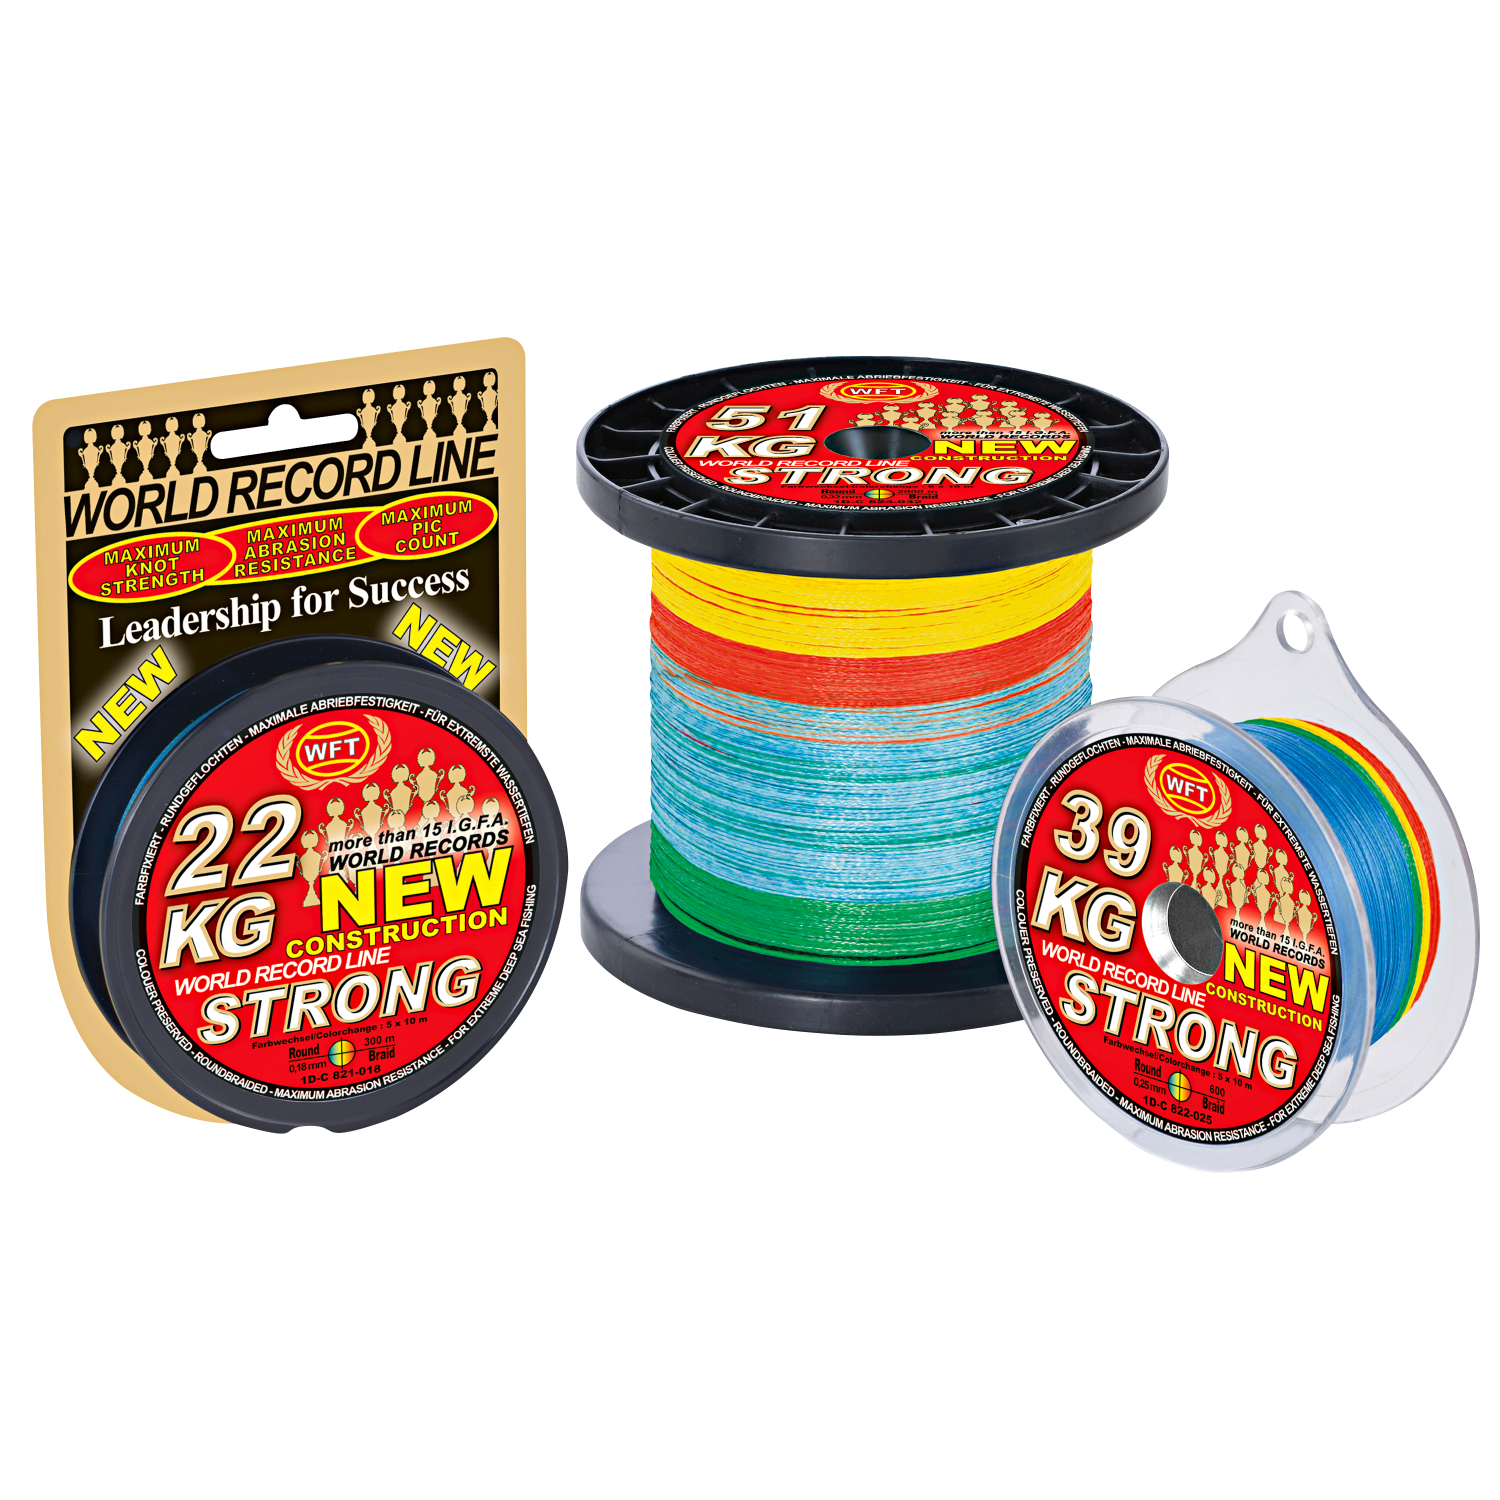 WFT Fishing Line KG Strong (multi-colour) at low prices